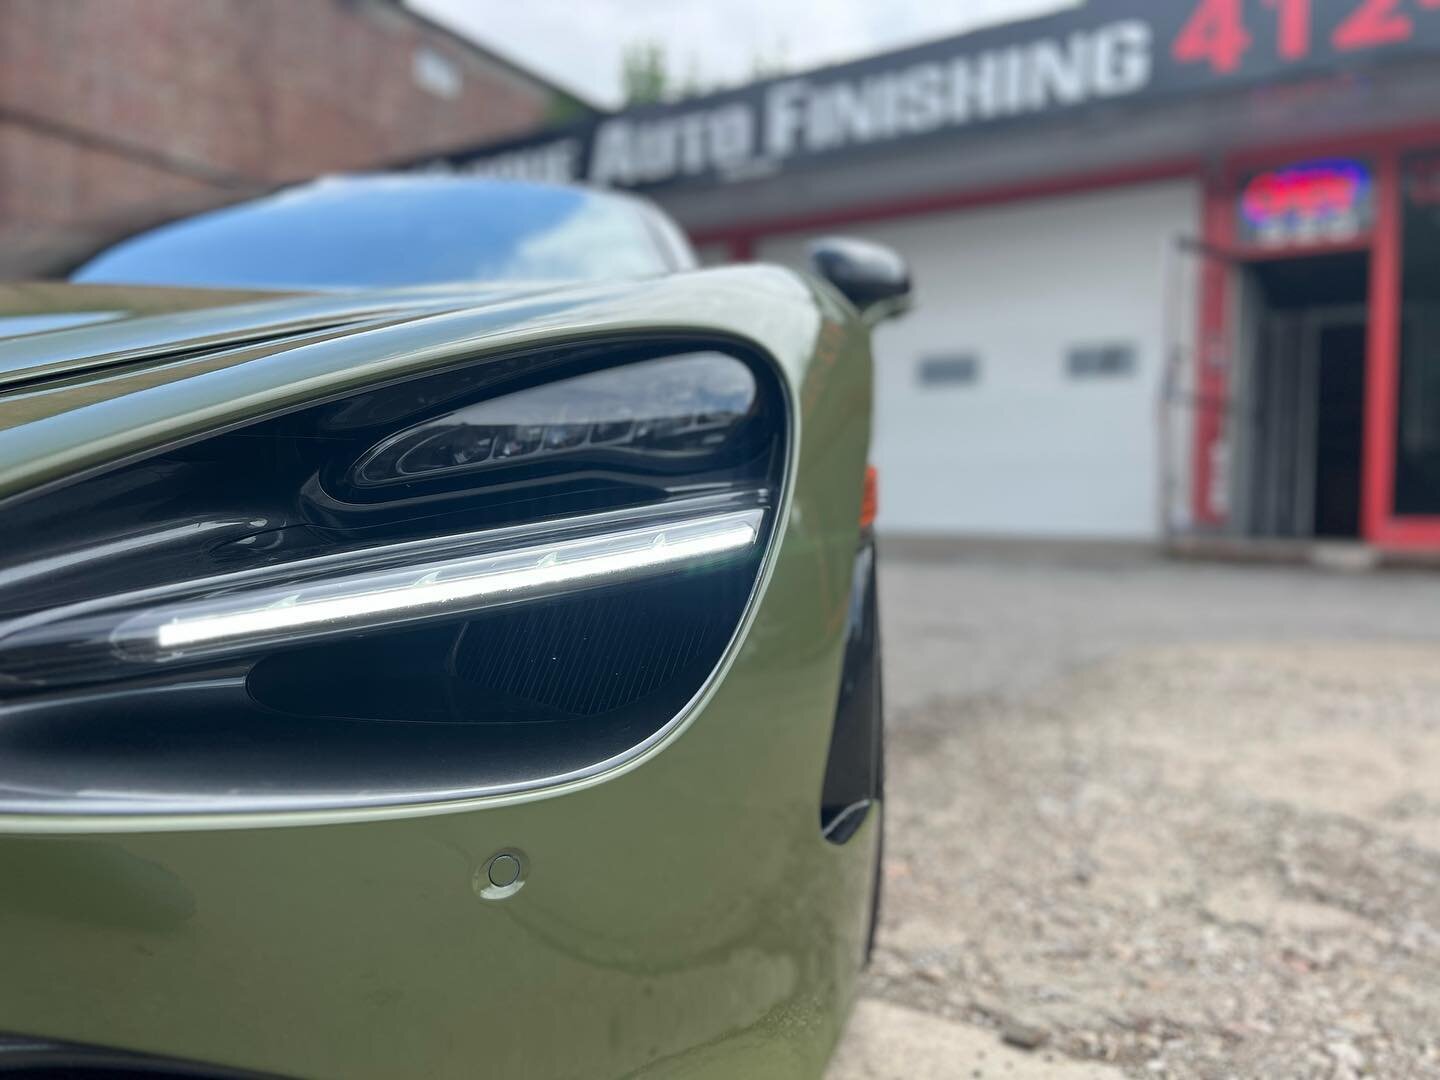 We finished up this launch edition @mclarenauto 720s in @platinumwrappingfilm badlands green and decided Kermit was a fitting name for it once all was said and done.